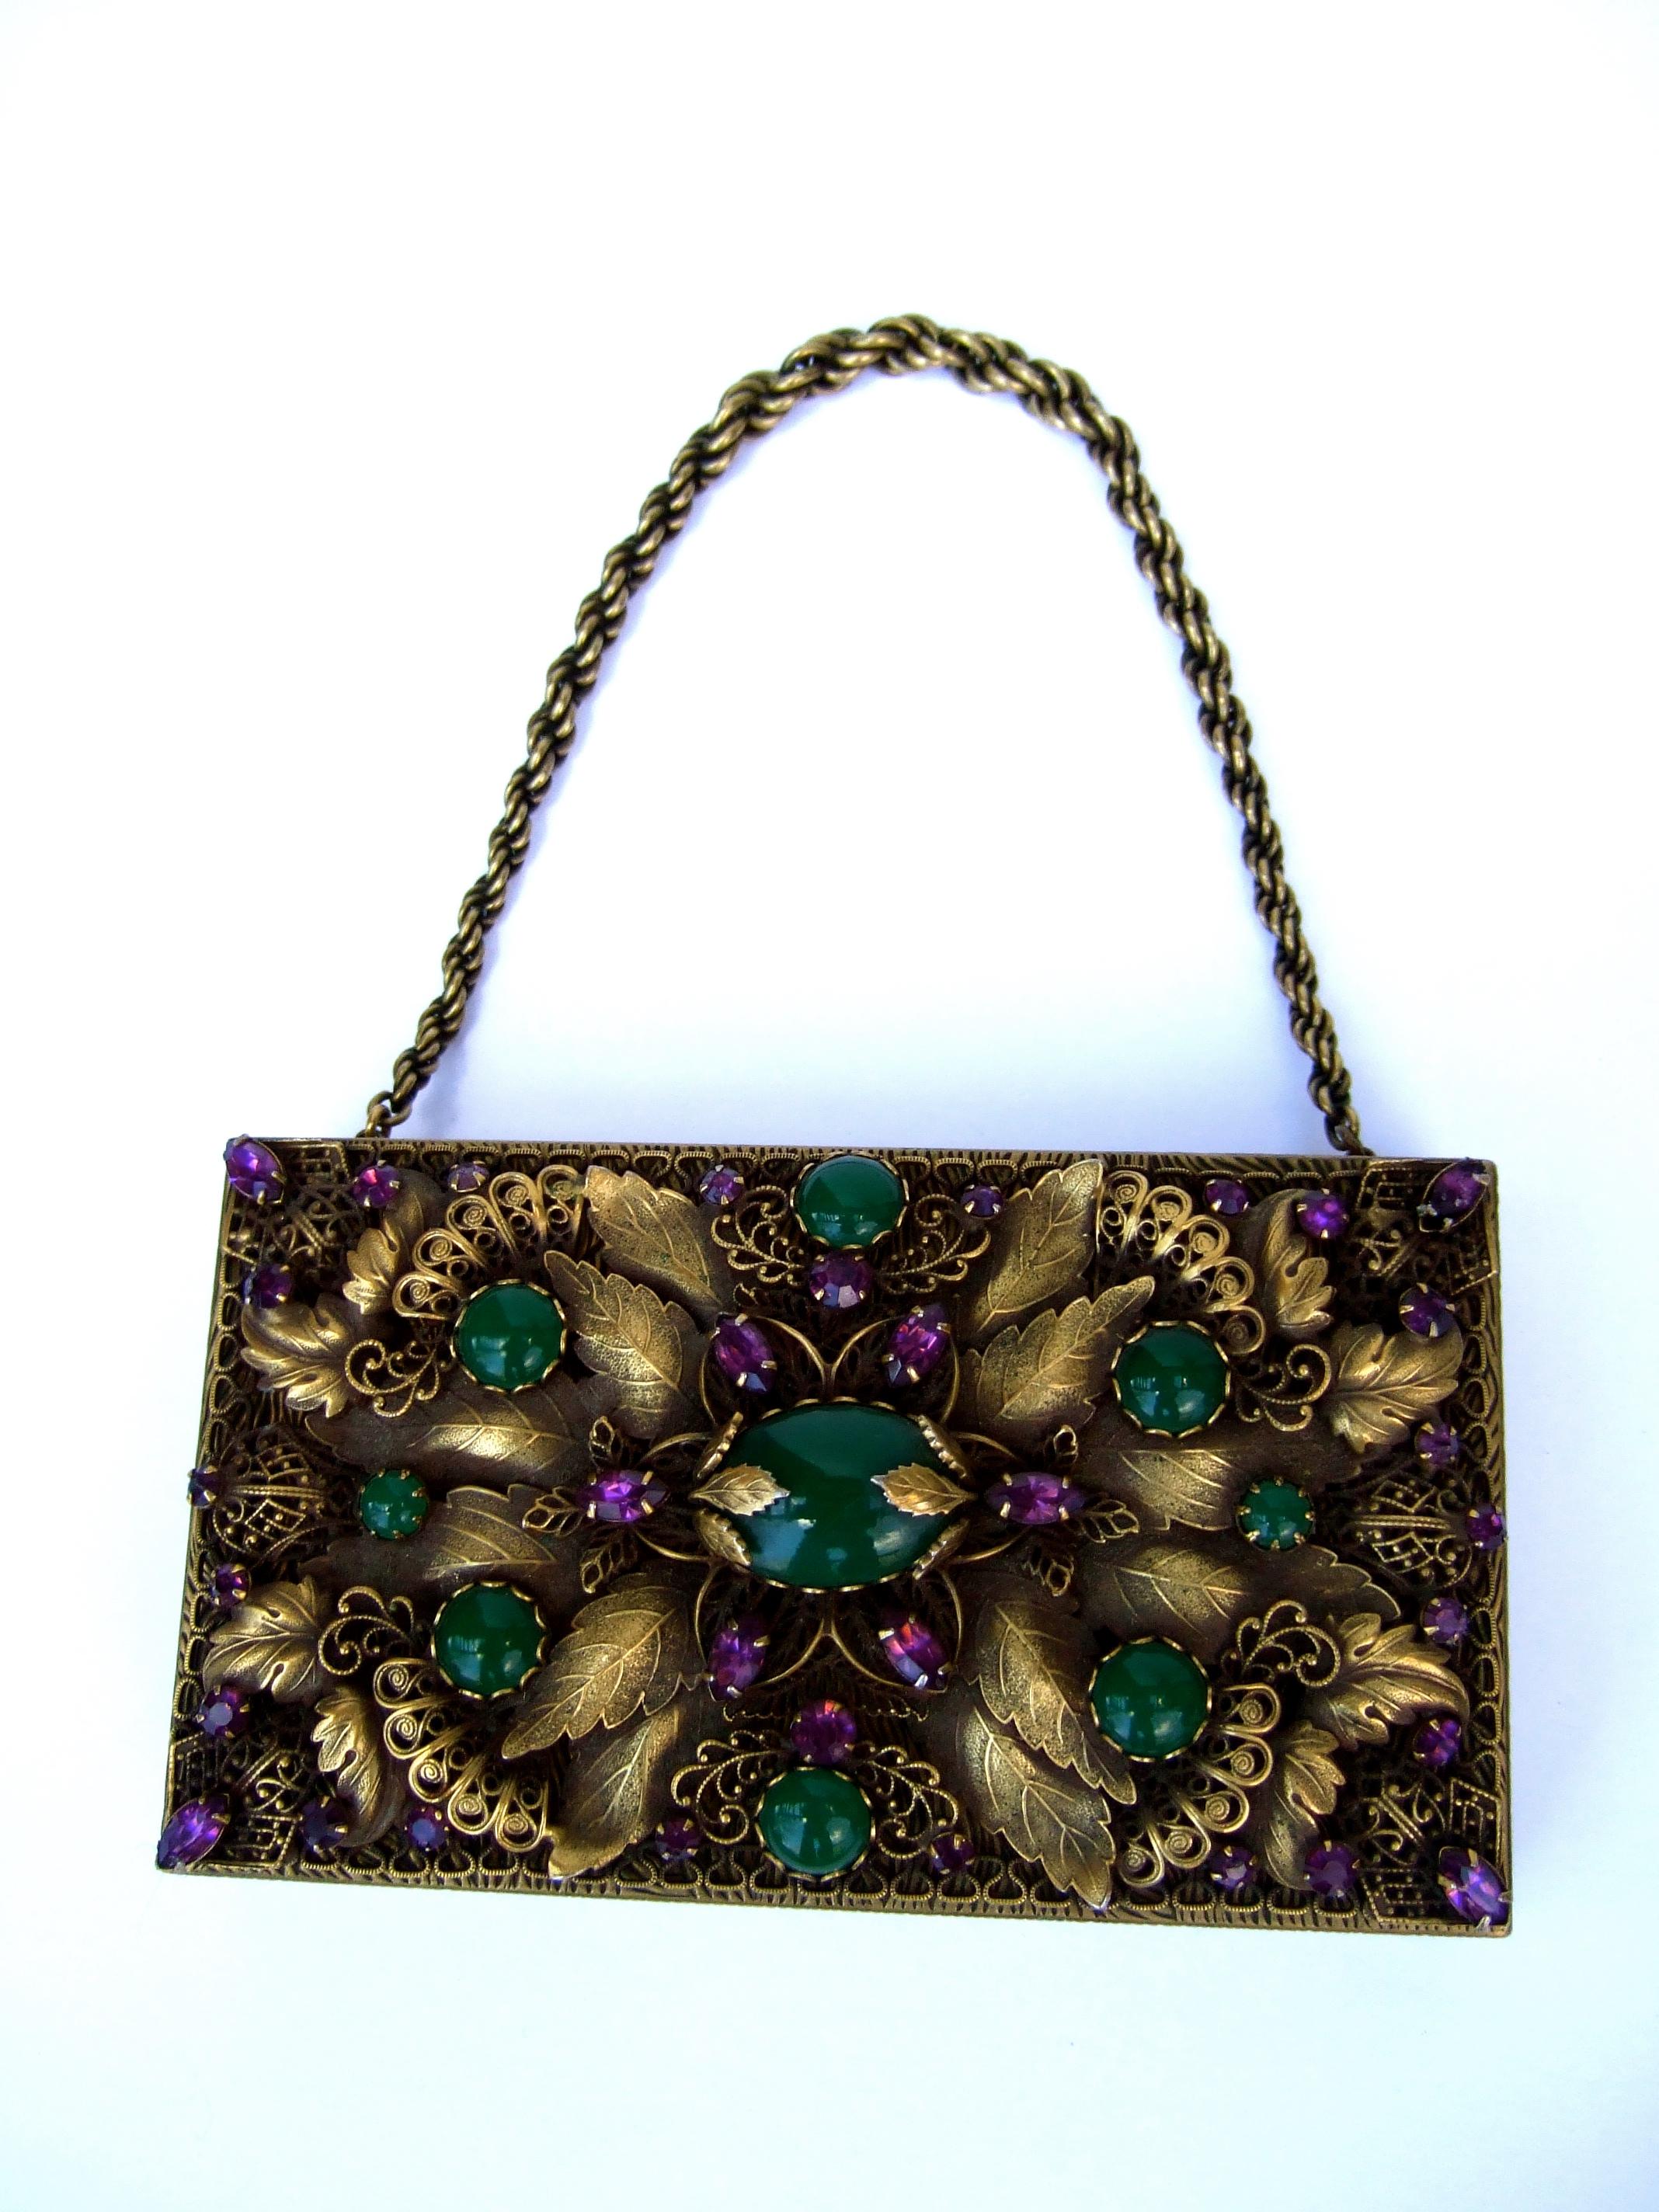 Opulent Jeweled Brass Metal Filigree Evening Bag - Compact Case by Evans c 1950s 4